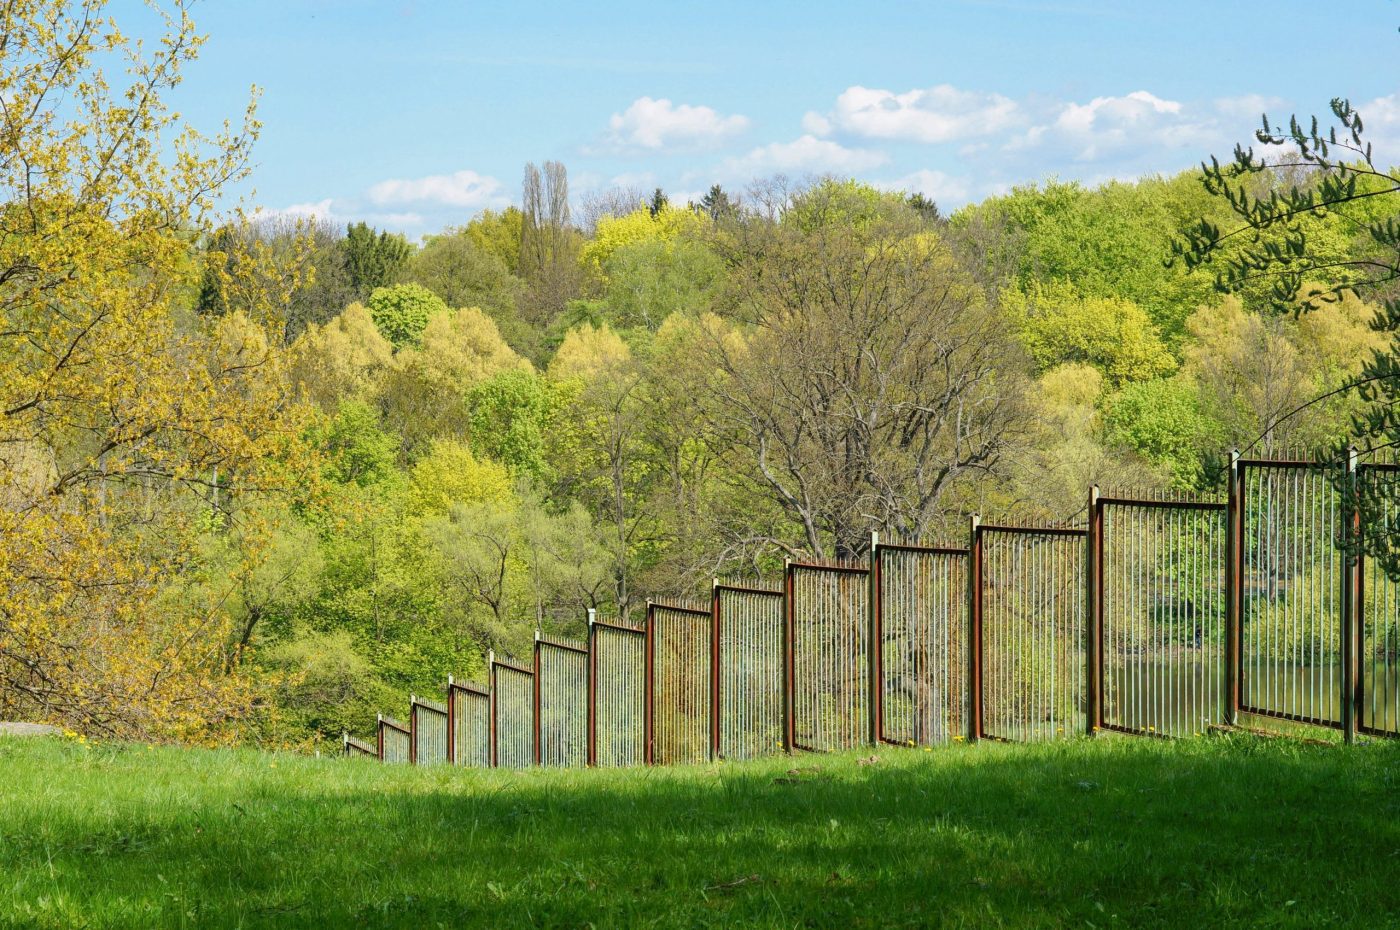 Metal fence in the garden with trees in the background